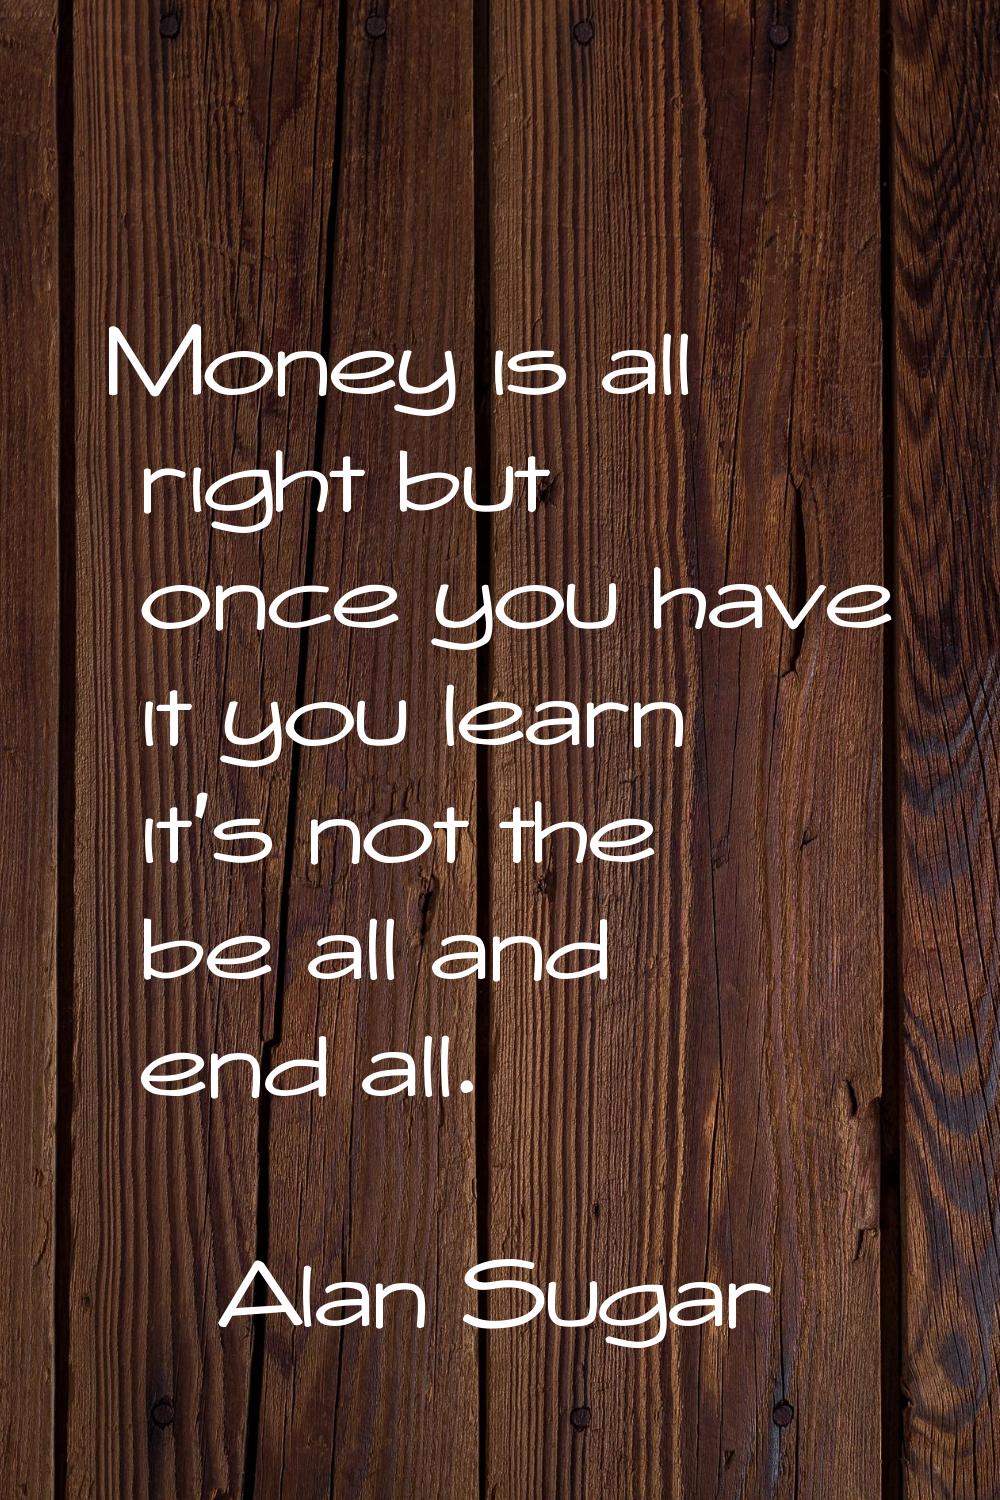 Money is all right but once you have it you learn it's not the be all and end all.